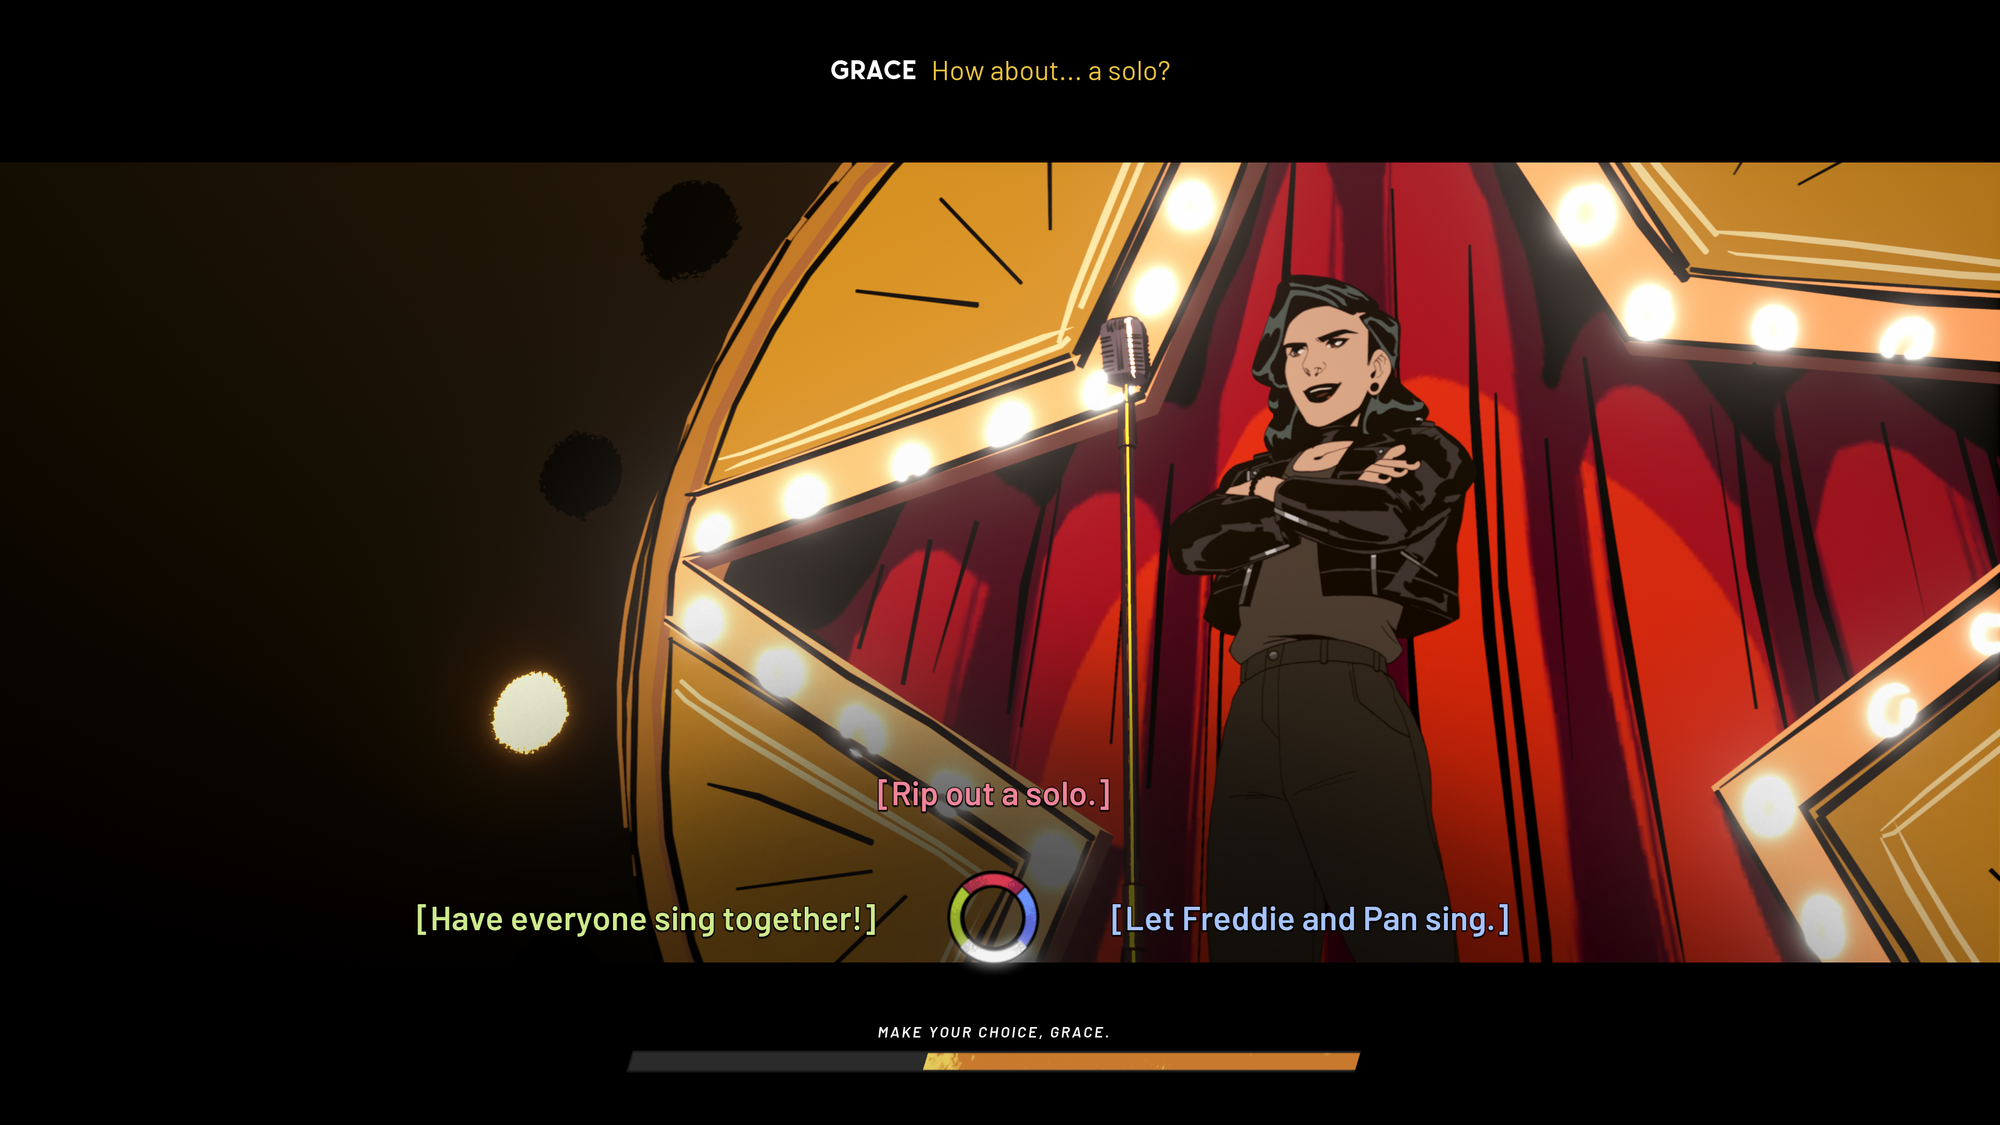 Grace, the protagonist of Stray Gods is visible and is mid-song. Behind her is a large, star-shape with Hollywood mirror style lights. There is a theatrical style red curtain visible behind this star shape. At the top of the screen, subtitles are visible for Grace. The text is italicized and reads: “How about…a solo?”. At the bottom of the screen is a work in progress dialogue wheel, with three options. To the left it reads ‘Let Freddie and Pan sing.’ To the right it reads ‘Have everyone sing together!’ The top reads ‘Rip out a solo.’